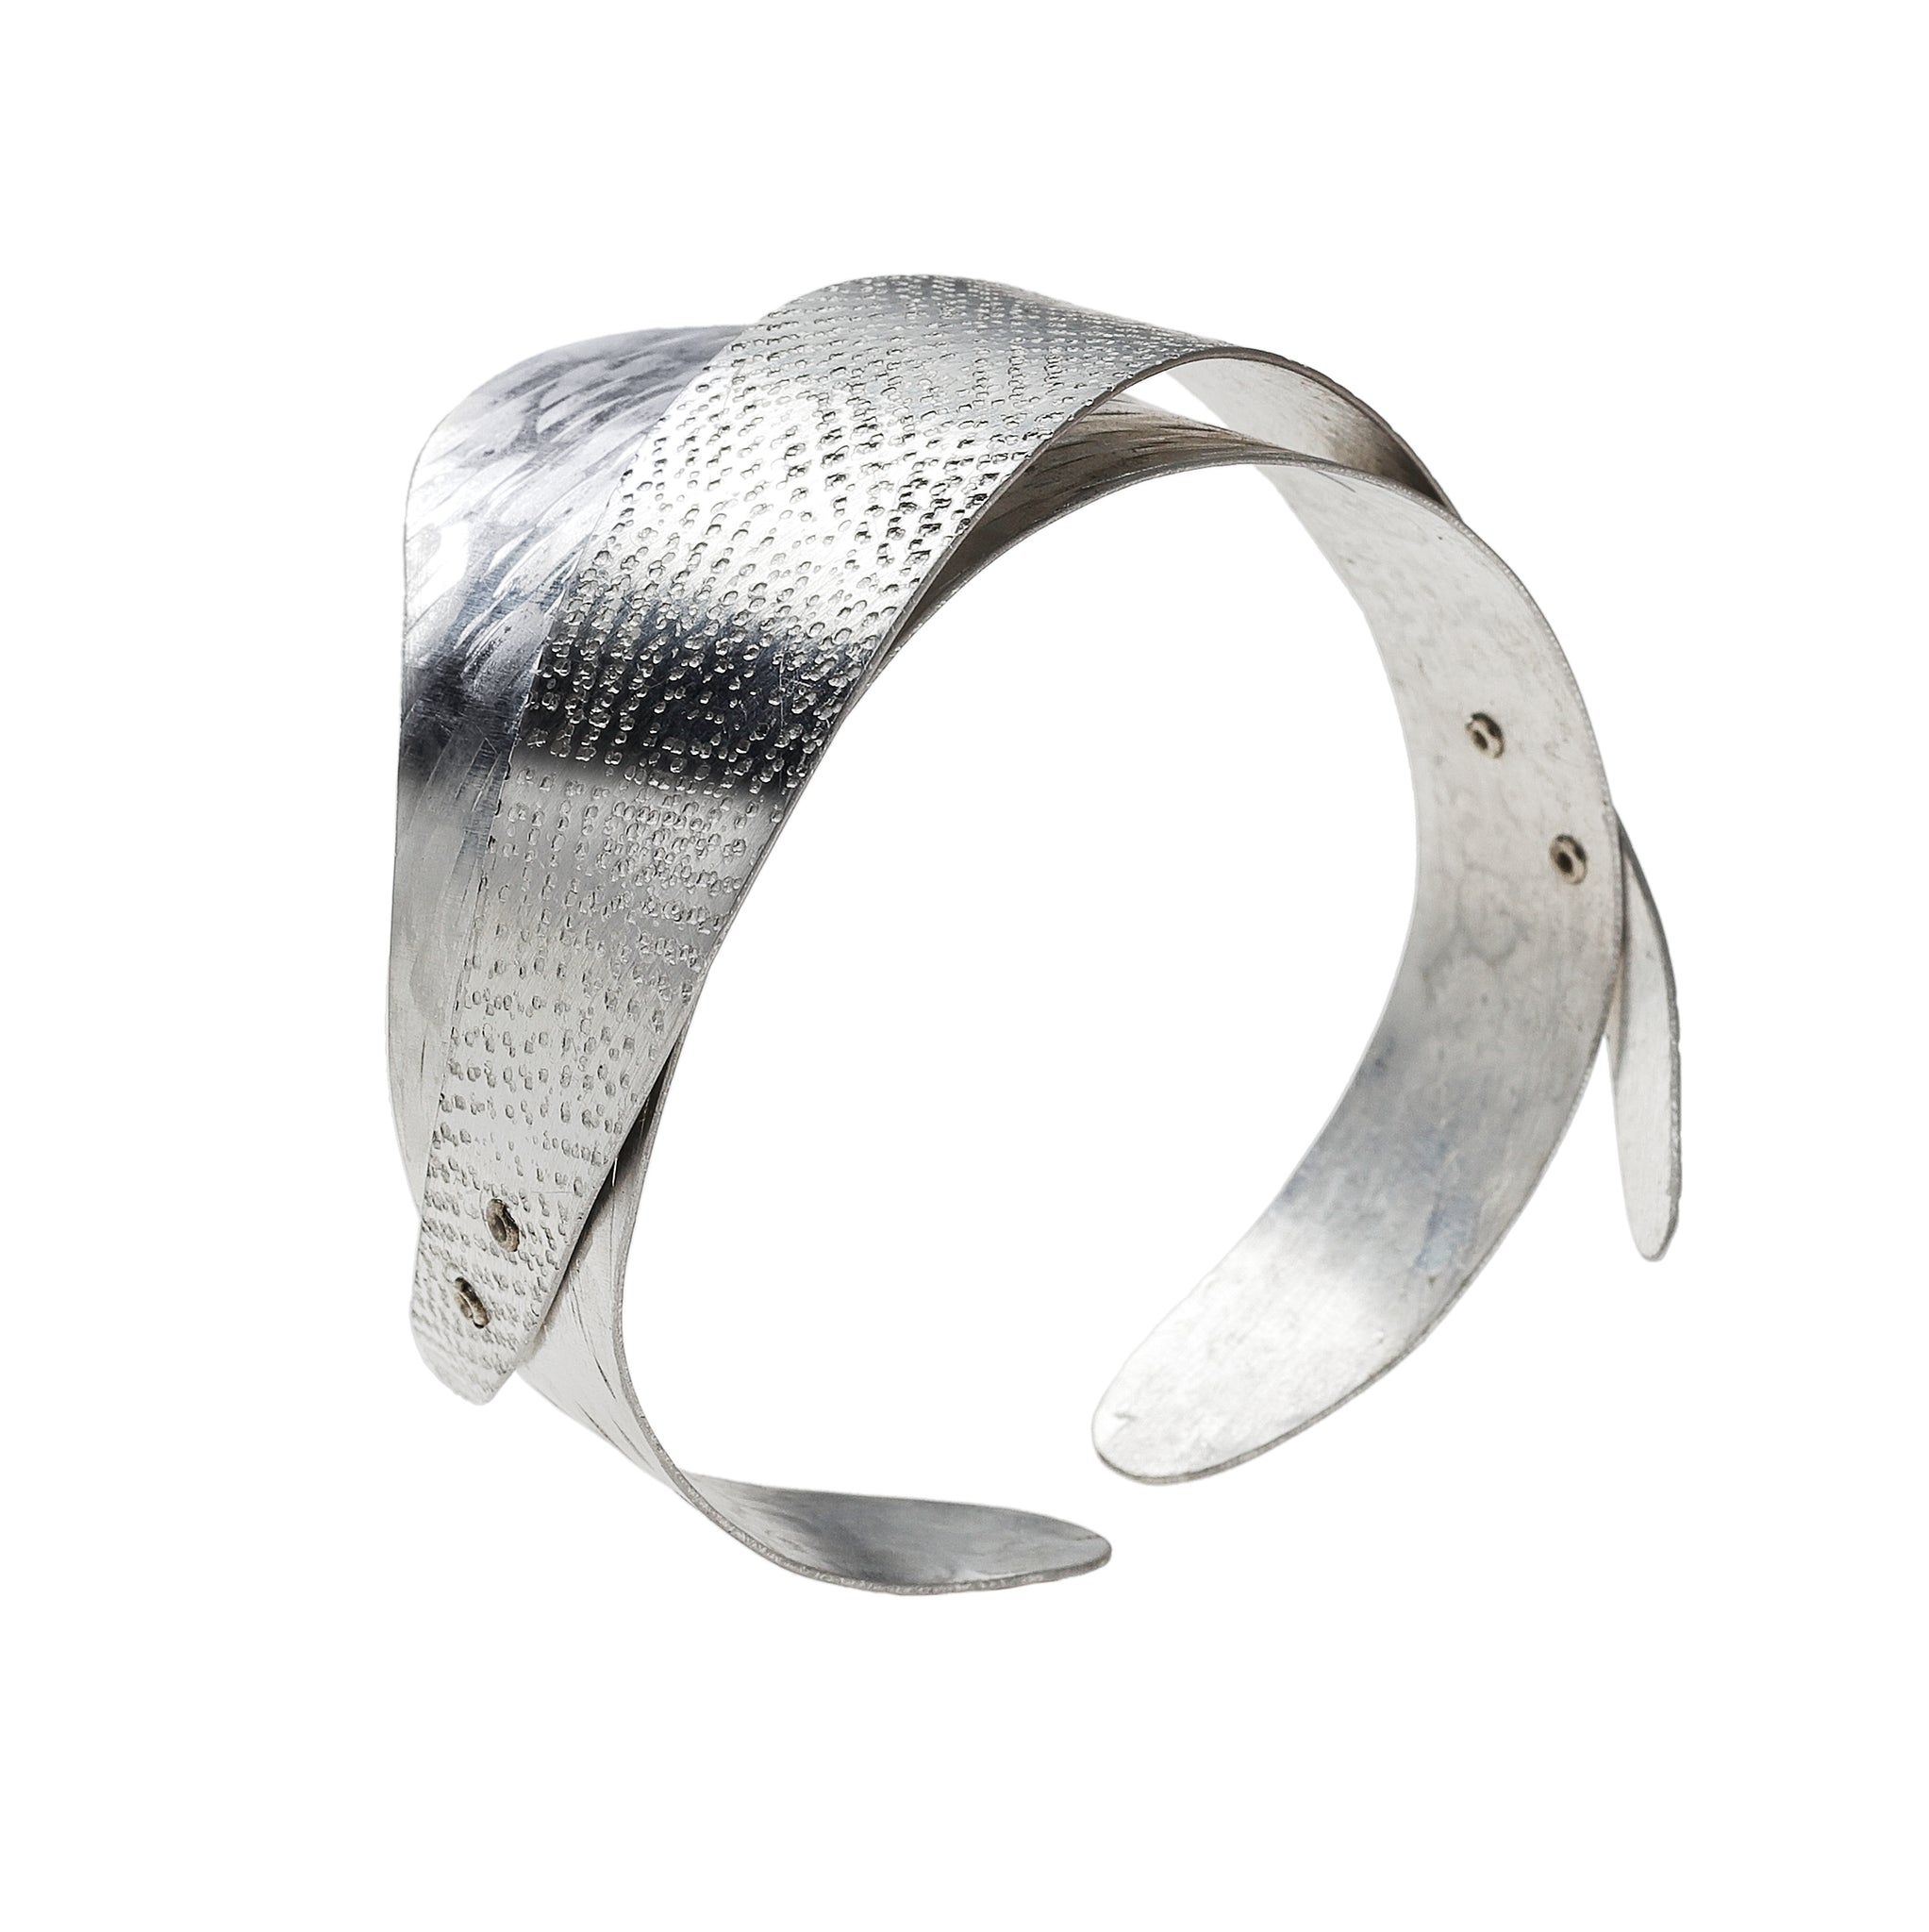 SWELL - Ocean Wave Inspired Multidimentional Aluminum Cuff with metal options from the WATER Collection